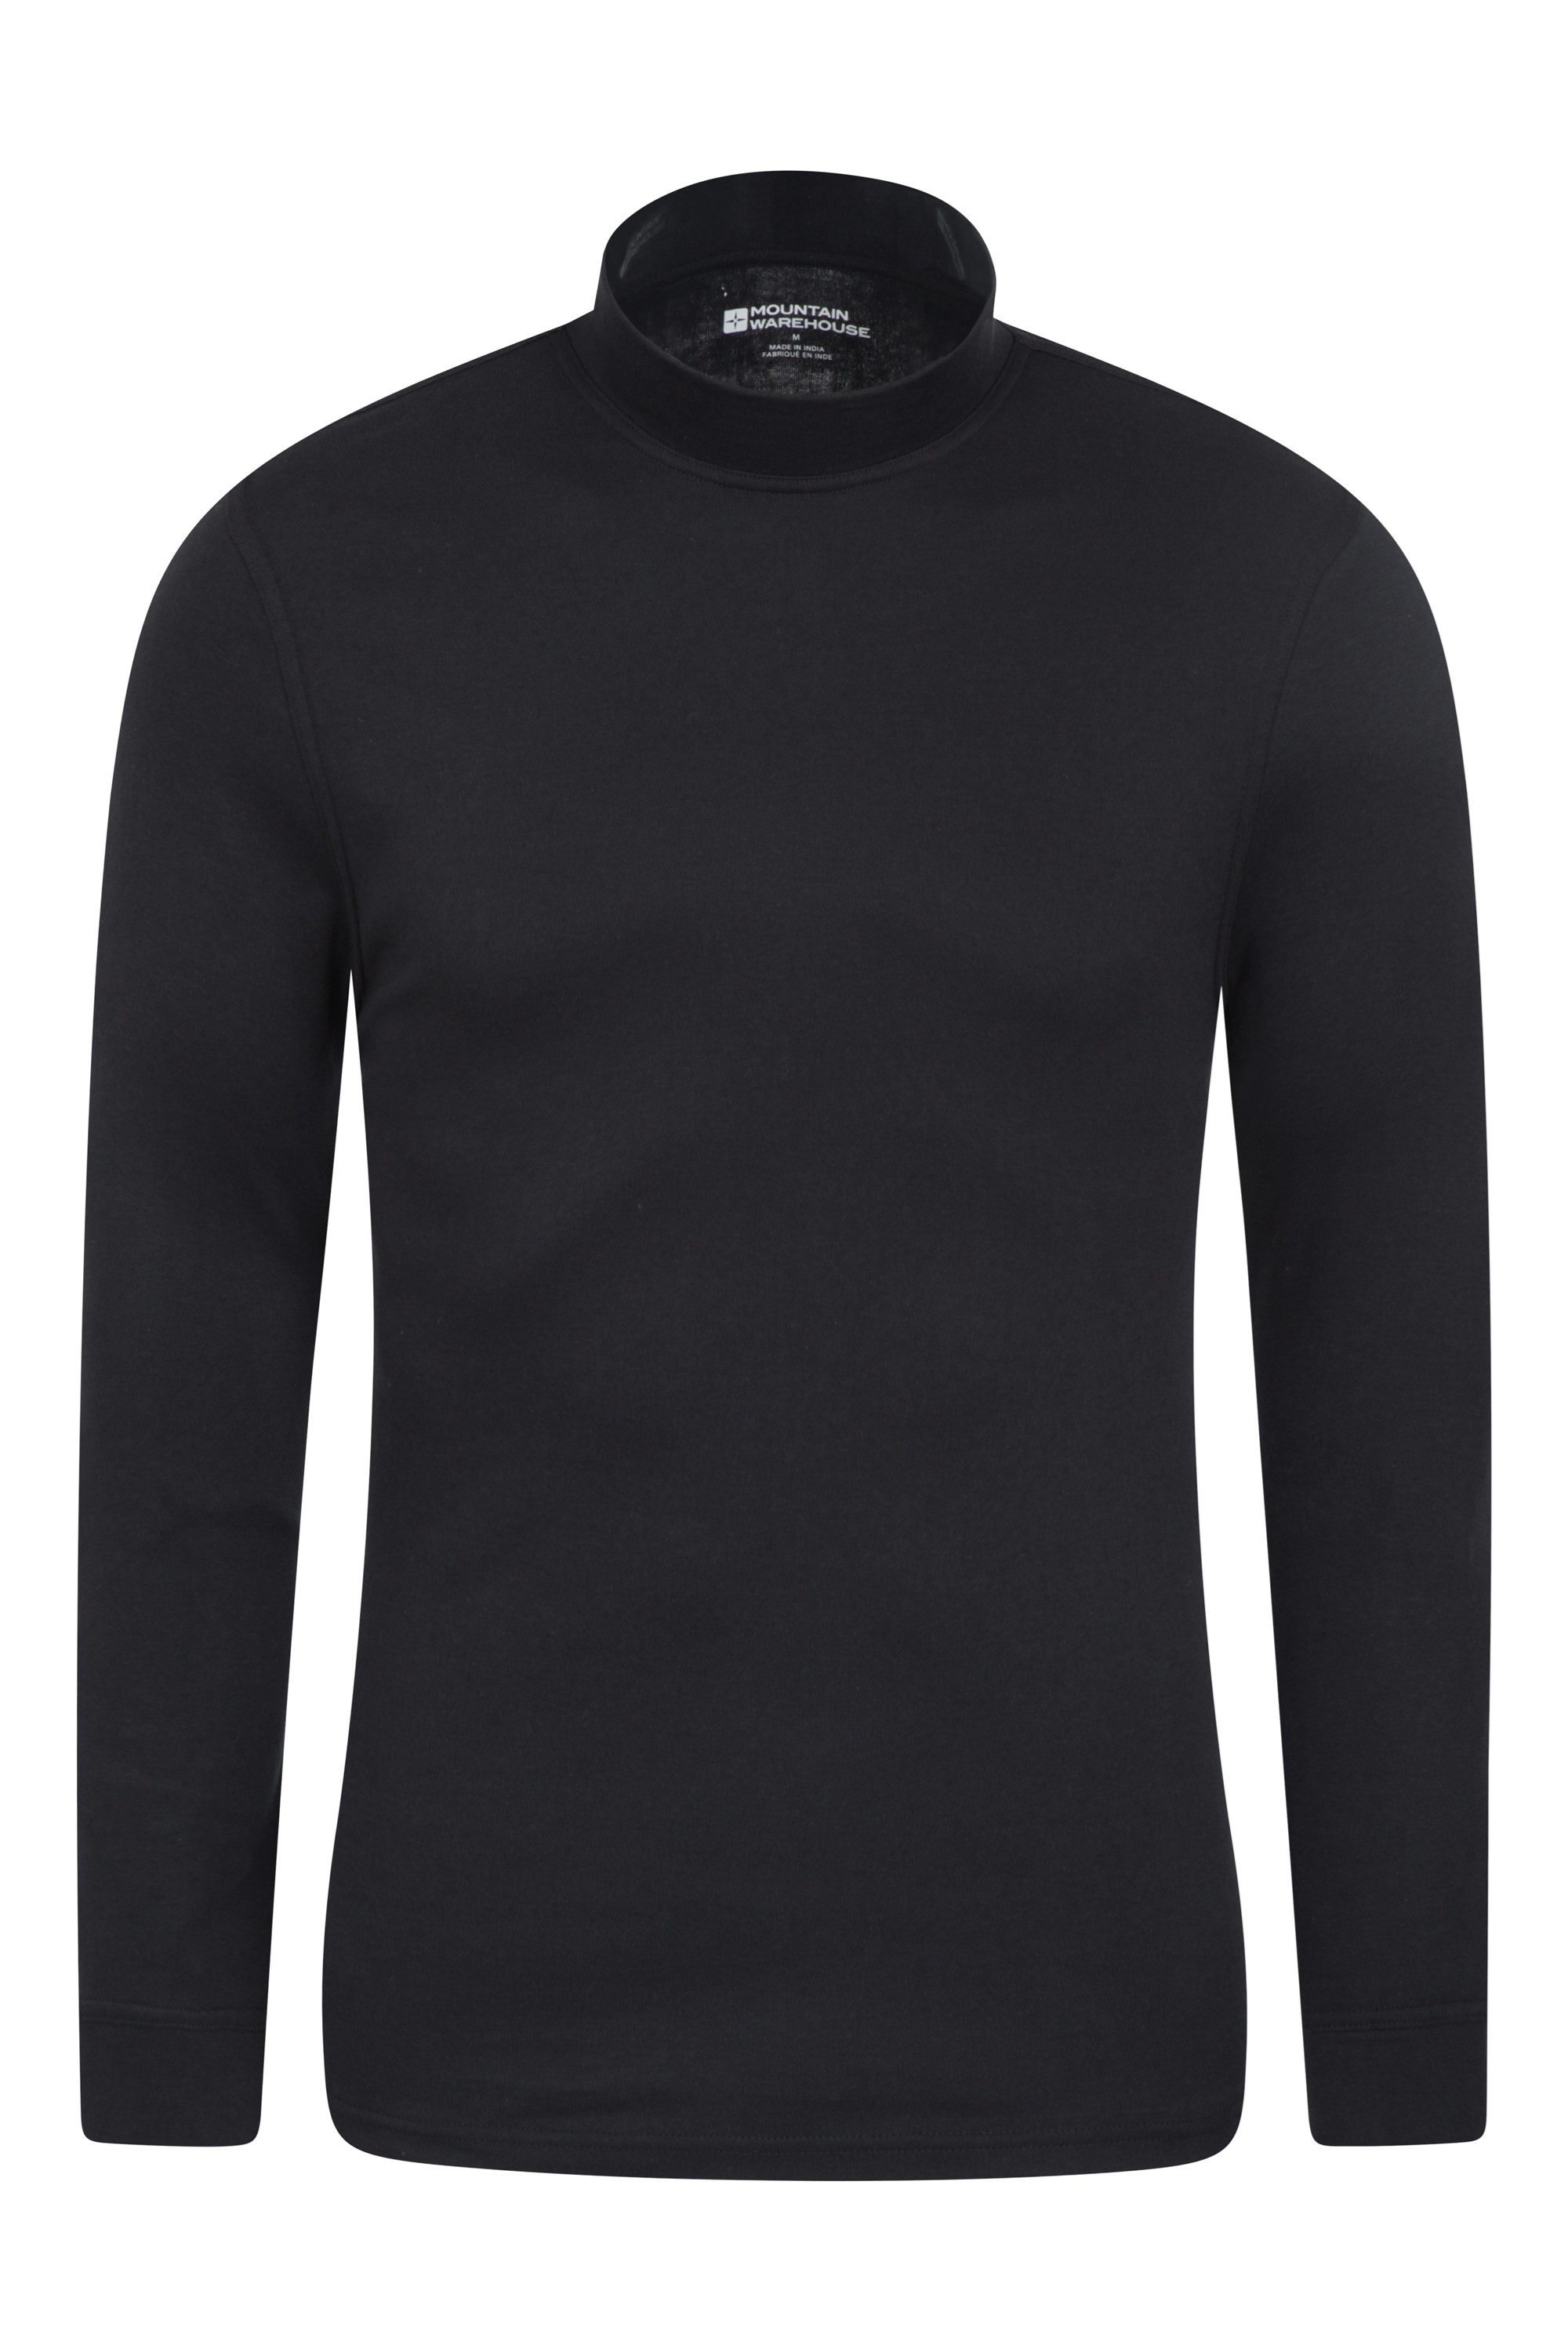 Mens Turtleneck Shirts Long Sleeve Slim Fit Thermal Top Winter Warm Base Layer Compression Tops Two Styles 